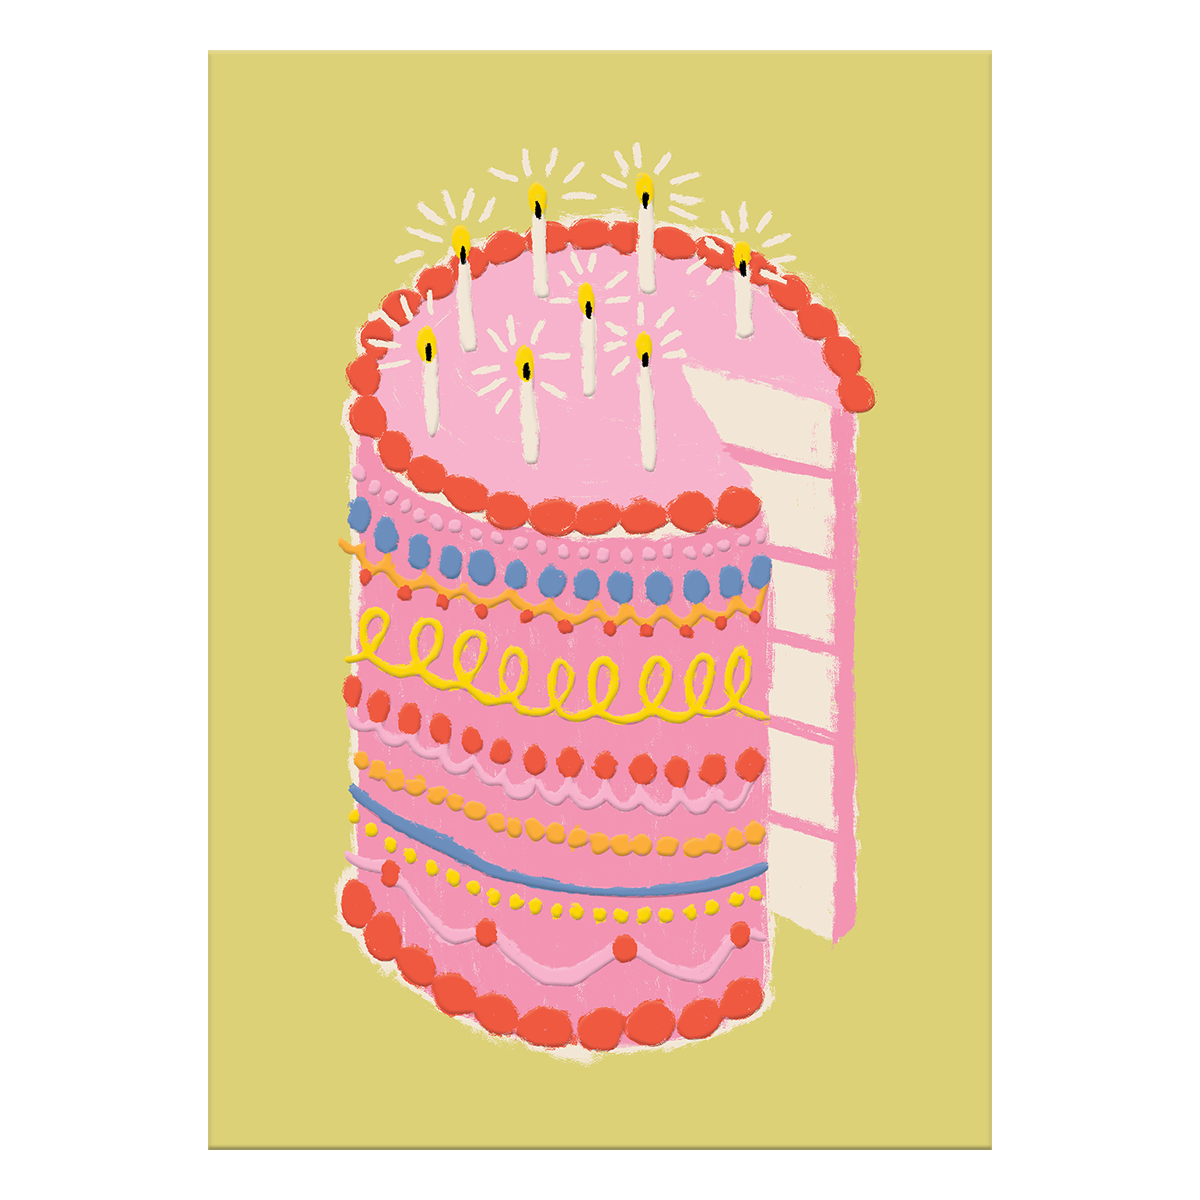 Tall Cake Greeting Card Product